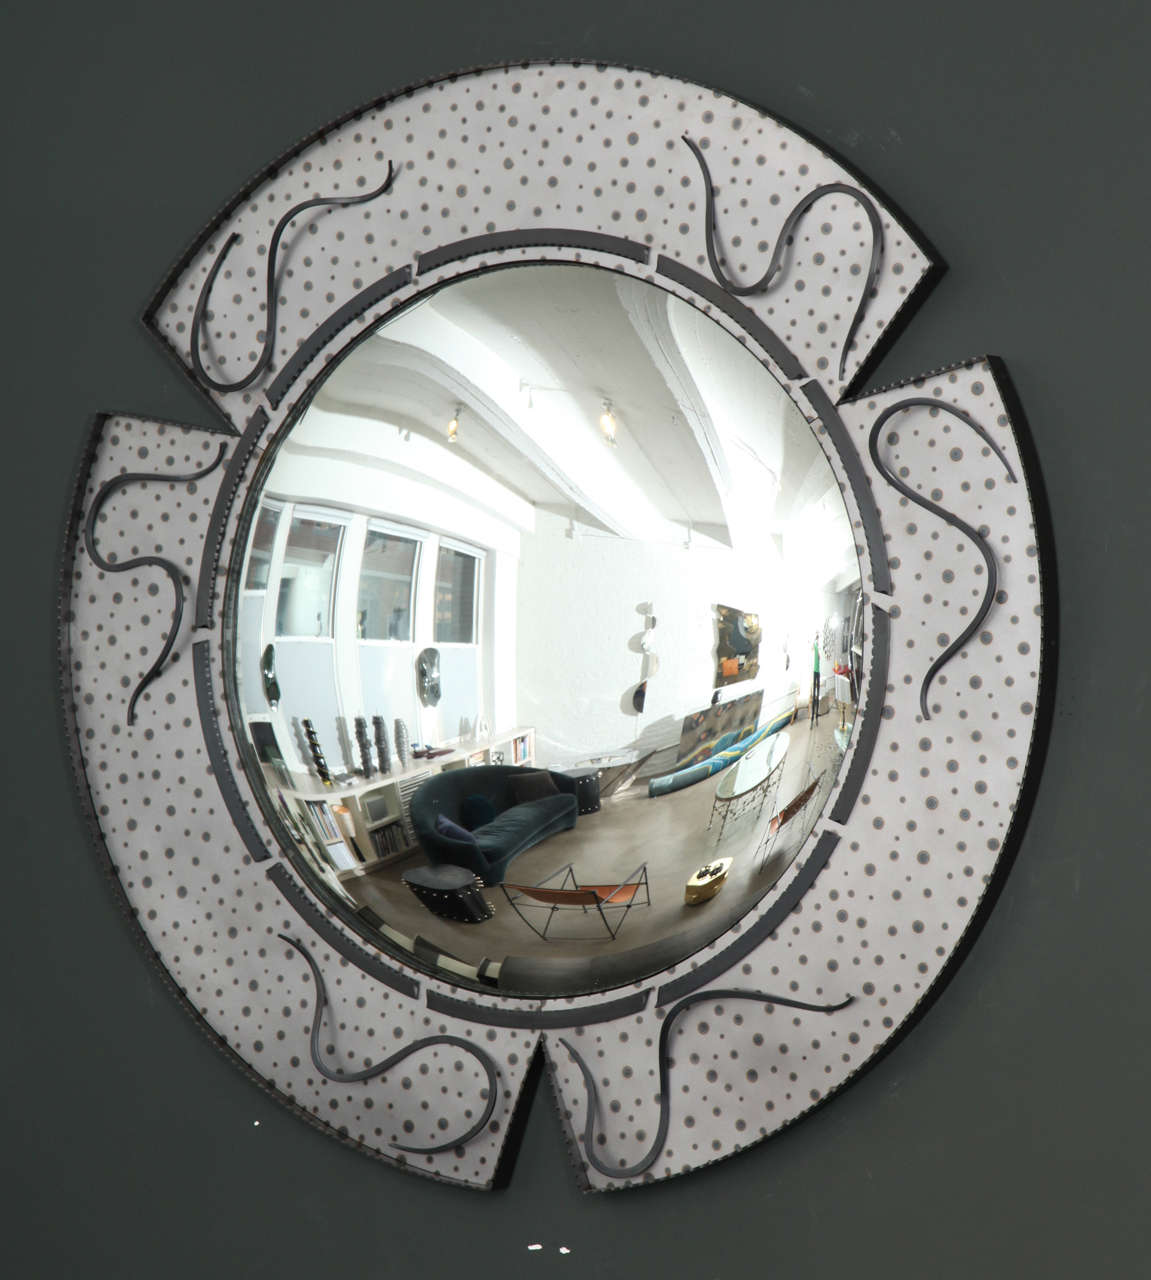 Paris mirror, 2014. Andre Dubreuil's latest vexing creation.

Renowned for his inventive, innovative furniture and decorative arts, André Dubreuil is a leading contemporary designer, whose background as an antiques dealer and painter informs his